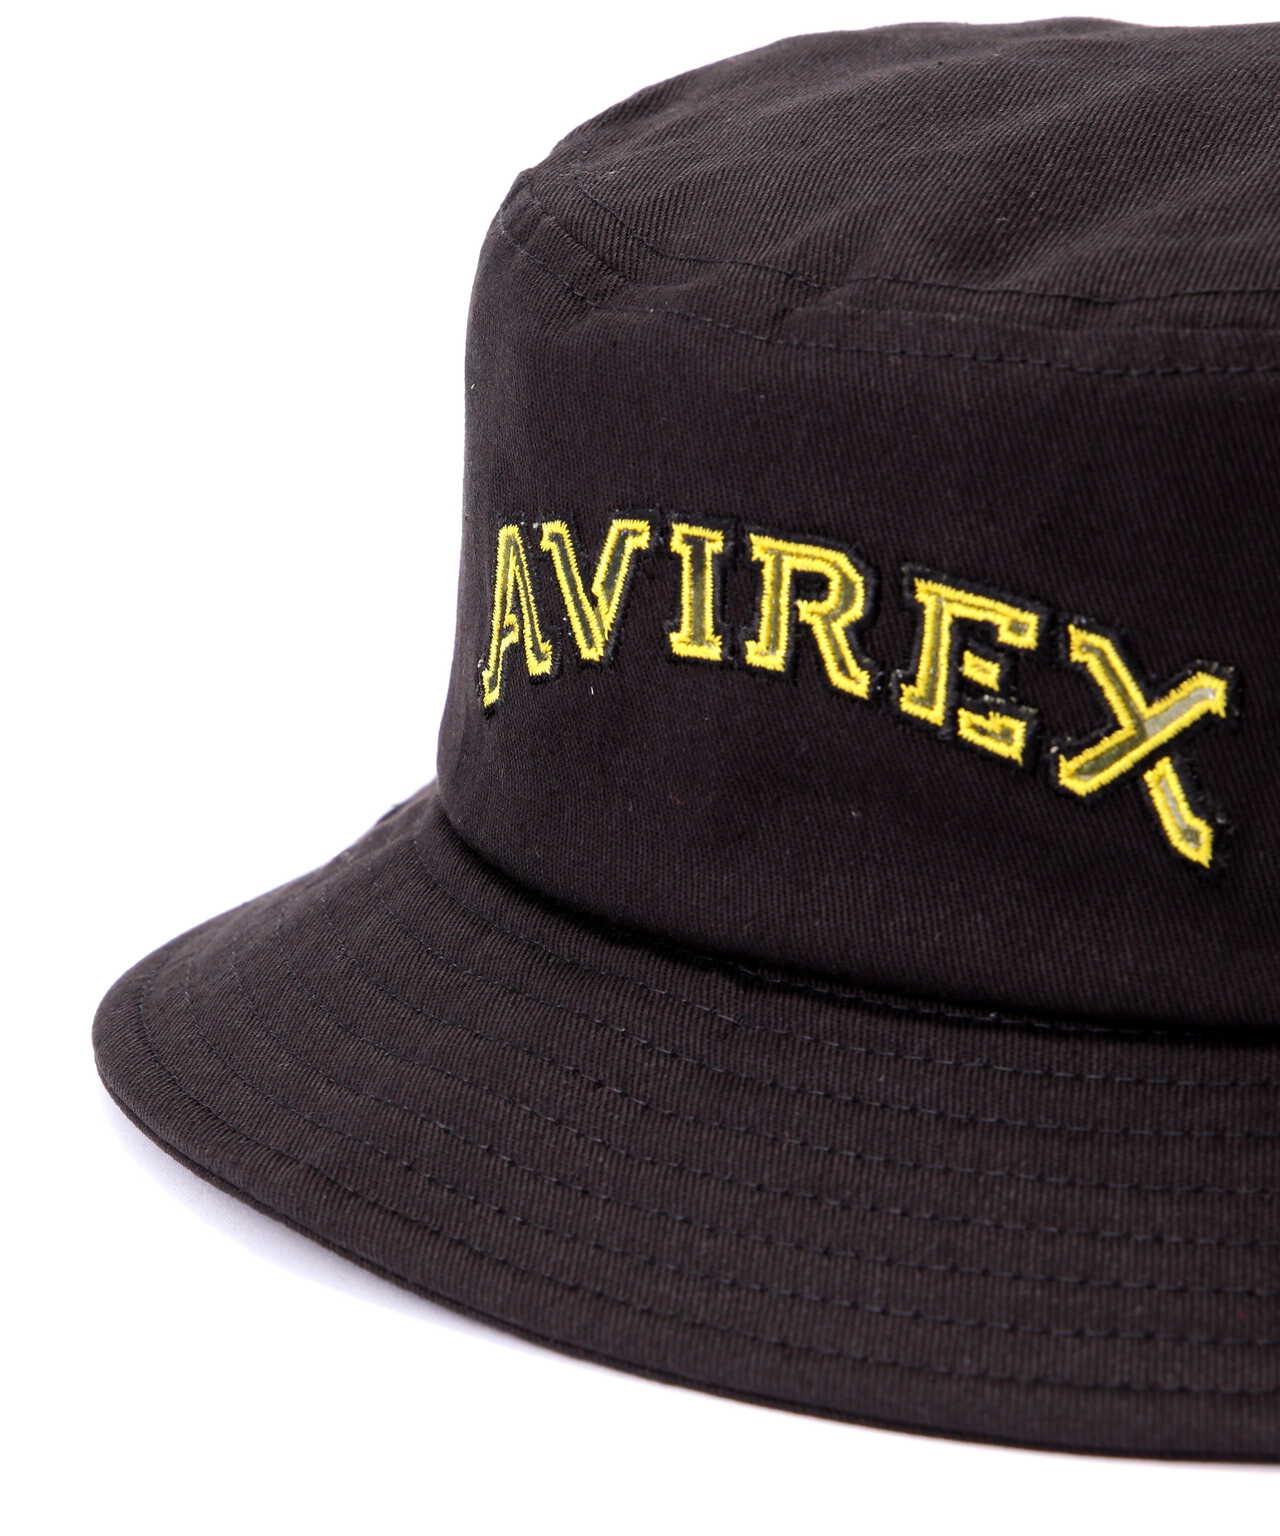 Ａ-STAR LOGO BUCKET HAT / Ａスター ロゴ バケット ハット